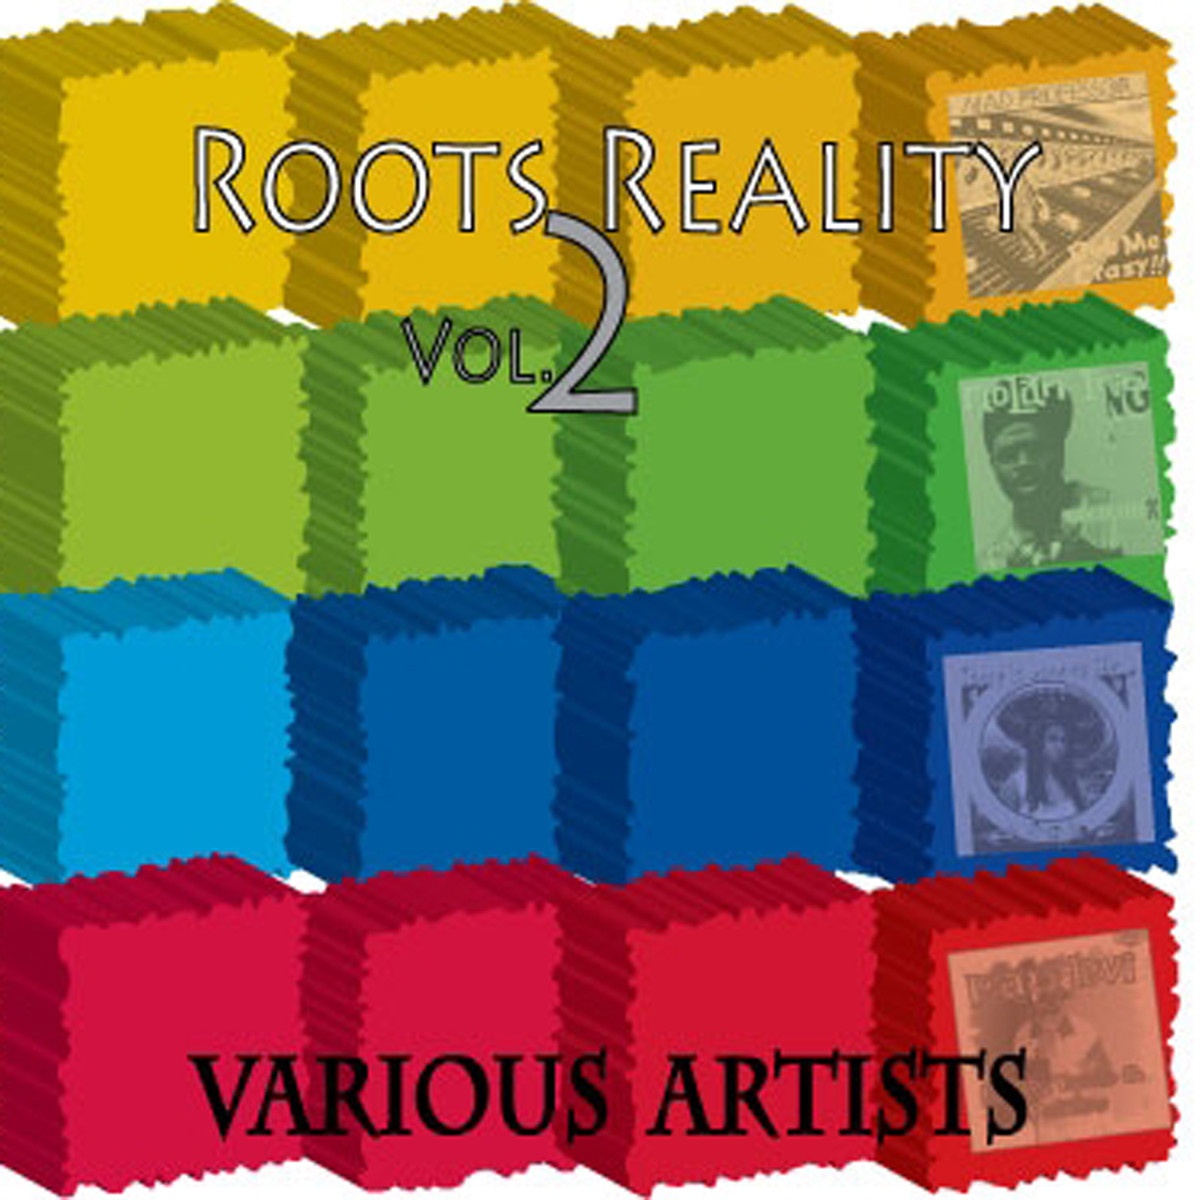 Roots Reality, Vol. 2